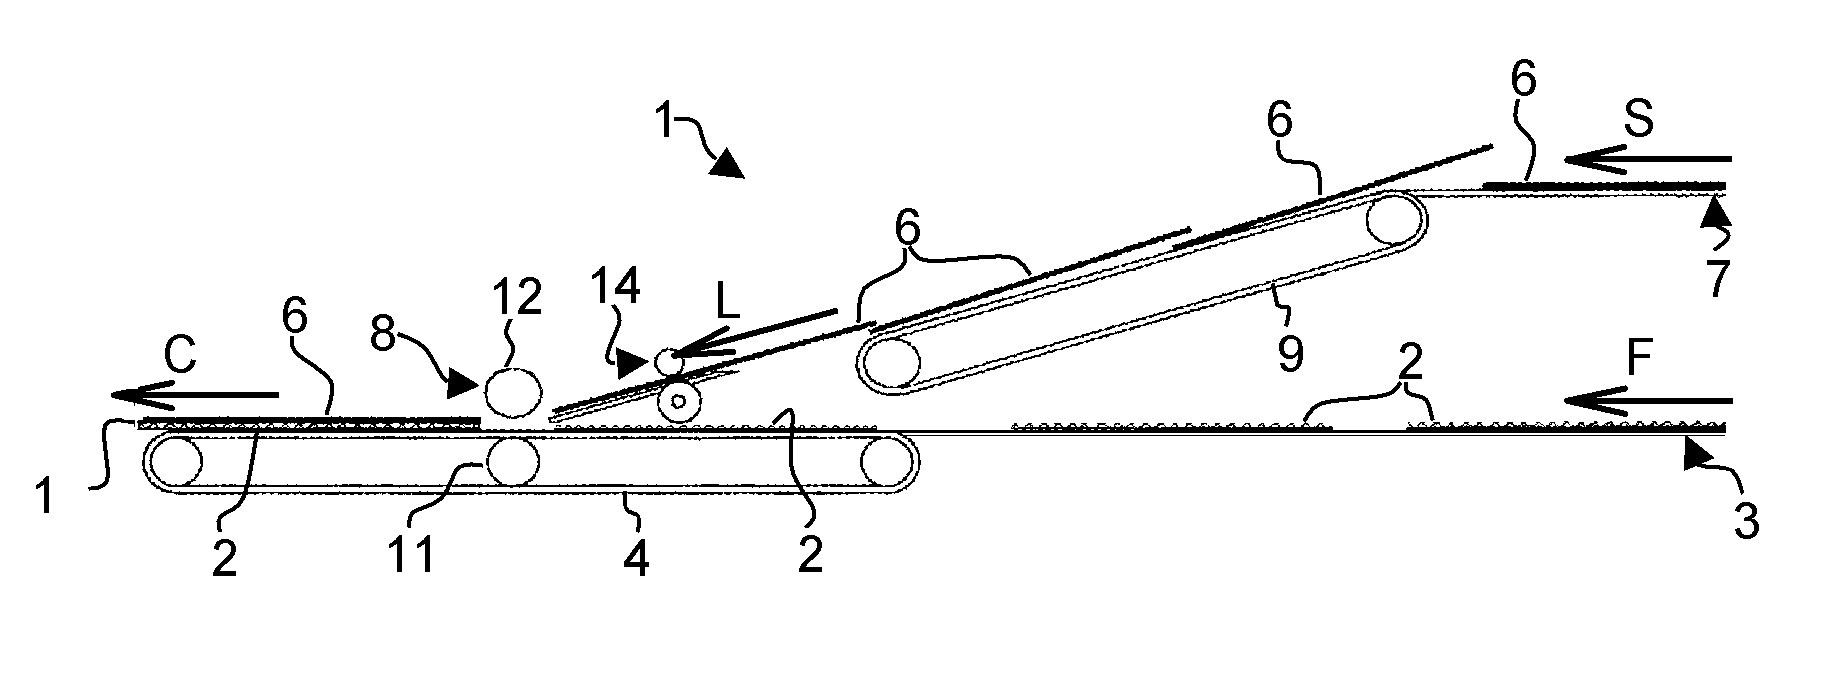 Method for manufacturing a multi-layer composite, arrangement for positioning a sheet-like element onto a backing in a laminating unit